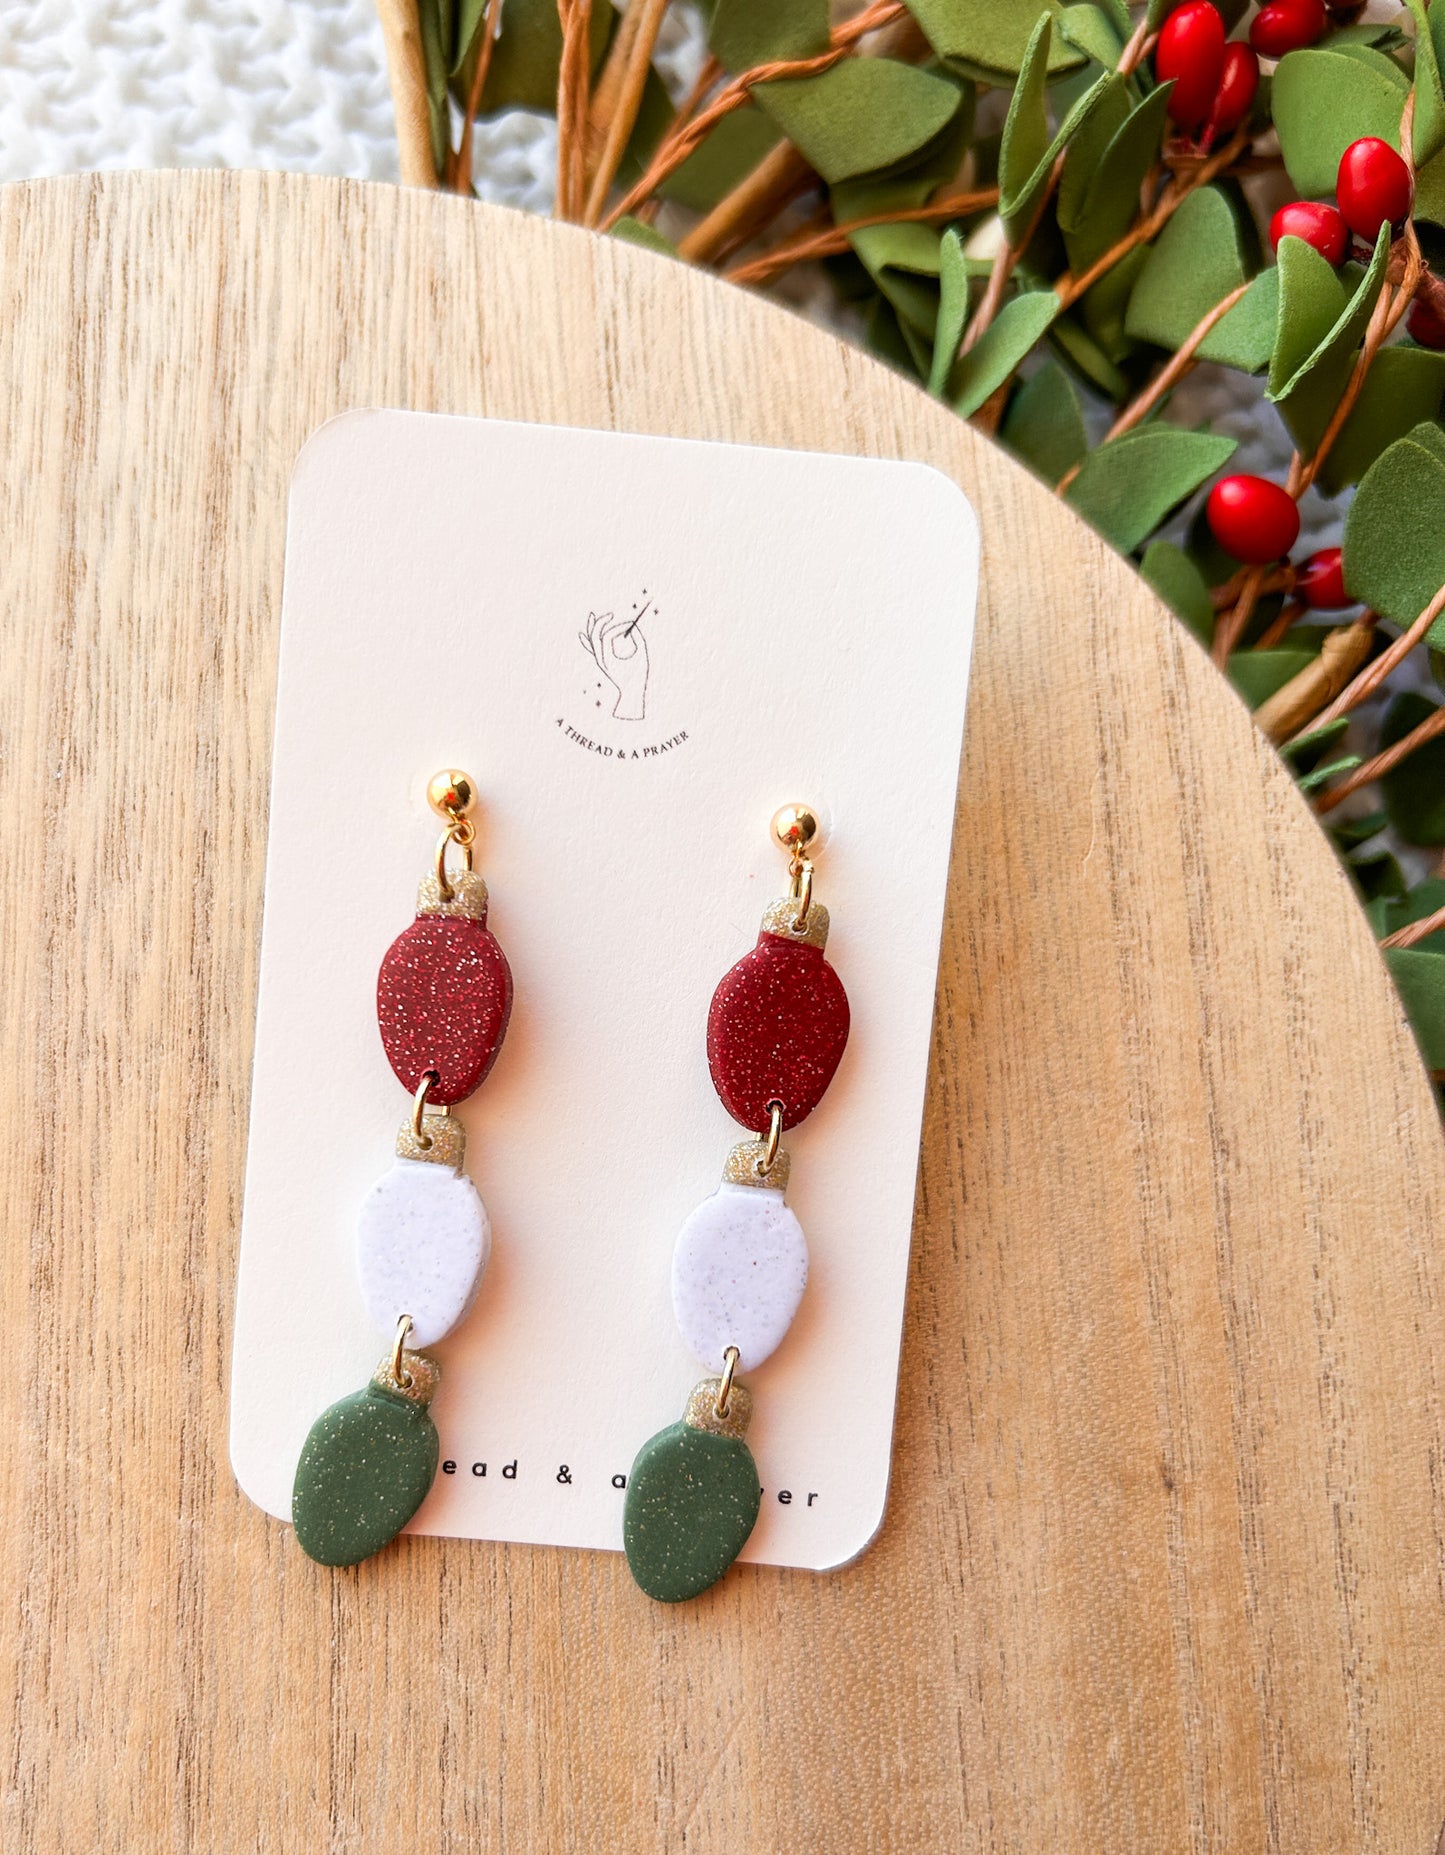 Most Wonderful Time of the Year Holiday Earrings | HO HO HO, Christmas Lights, Candy Cane Inspired | Christmas Earrings | Gift Earrings | Holiday Colors | Lightweight